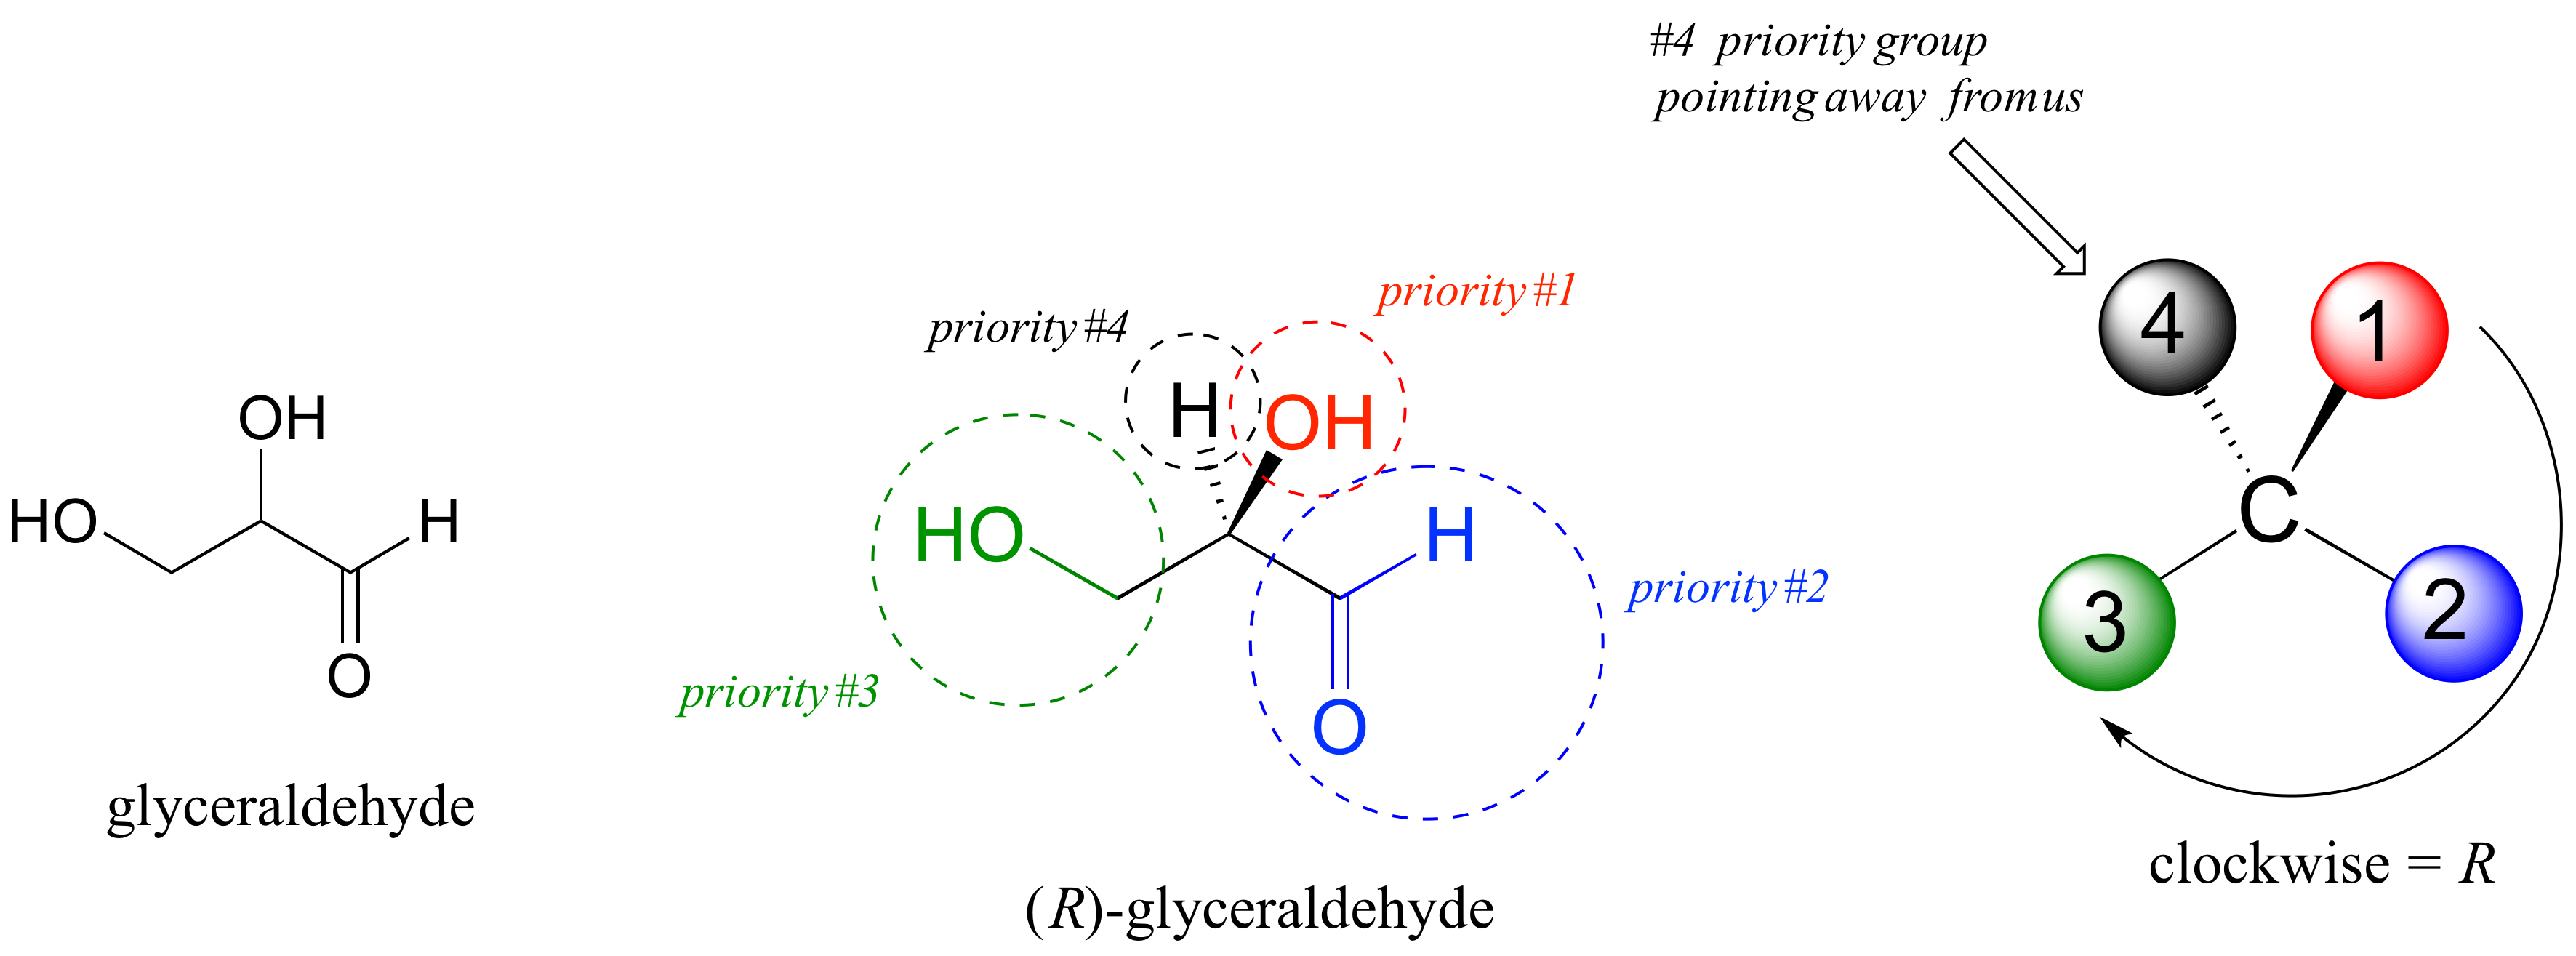 A 3 carbon structure with a double bond to oxygen at carbon 1, and OH groups at each of carbons 2 and 3, has the common name glyceraldehyde. Carbon 2 is shown with color coded groups surrounding it: the H as a dashed wedge in black, the OH as a solid wedge in red, the CH2OH with bonds as normal lines in green and the carbon double bonded to O and an H also as normal lines in blue. With the lowest priority group (H) given the dashed wedge, traveling from the red to blue to green groups provides a clockwise progression. Hence the chiral carbon is in the R configuration.